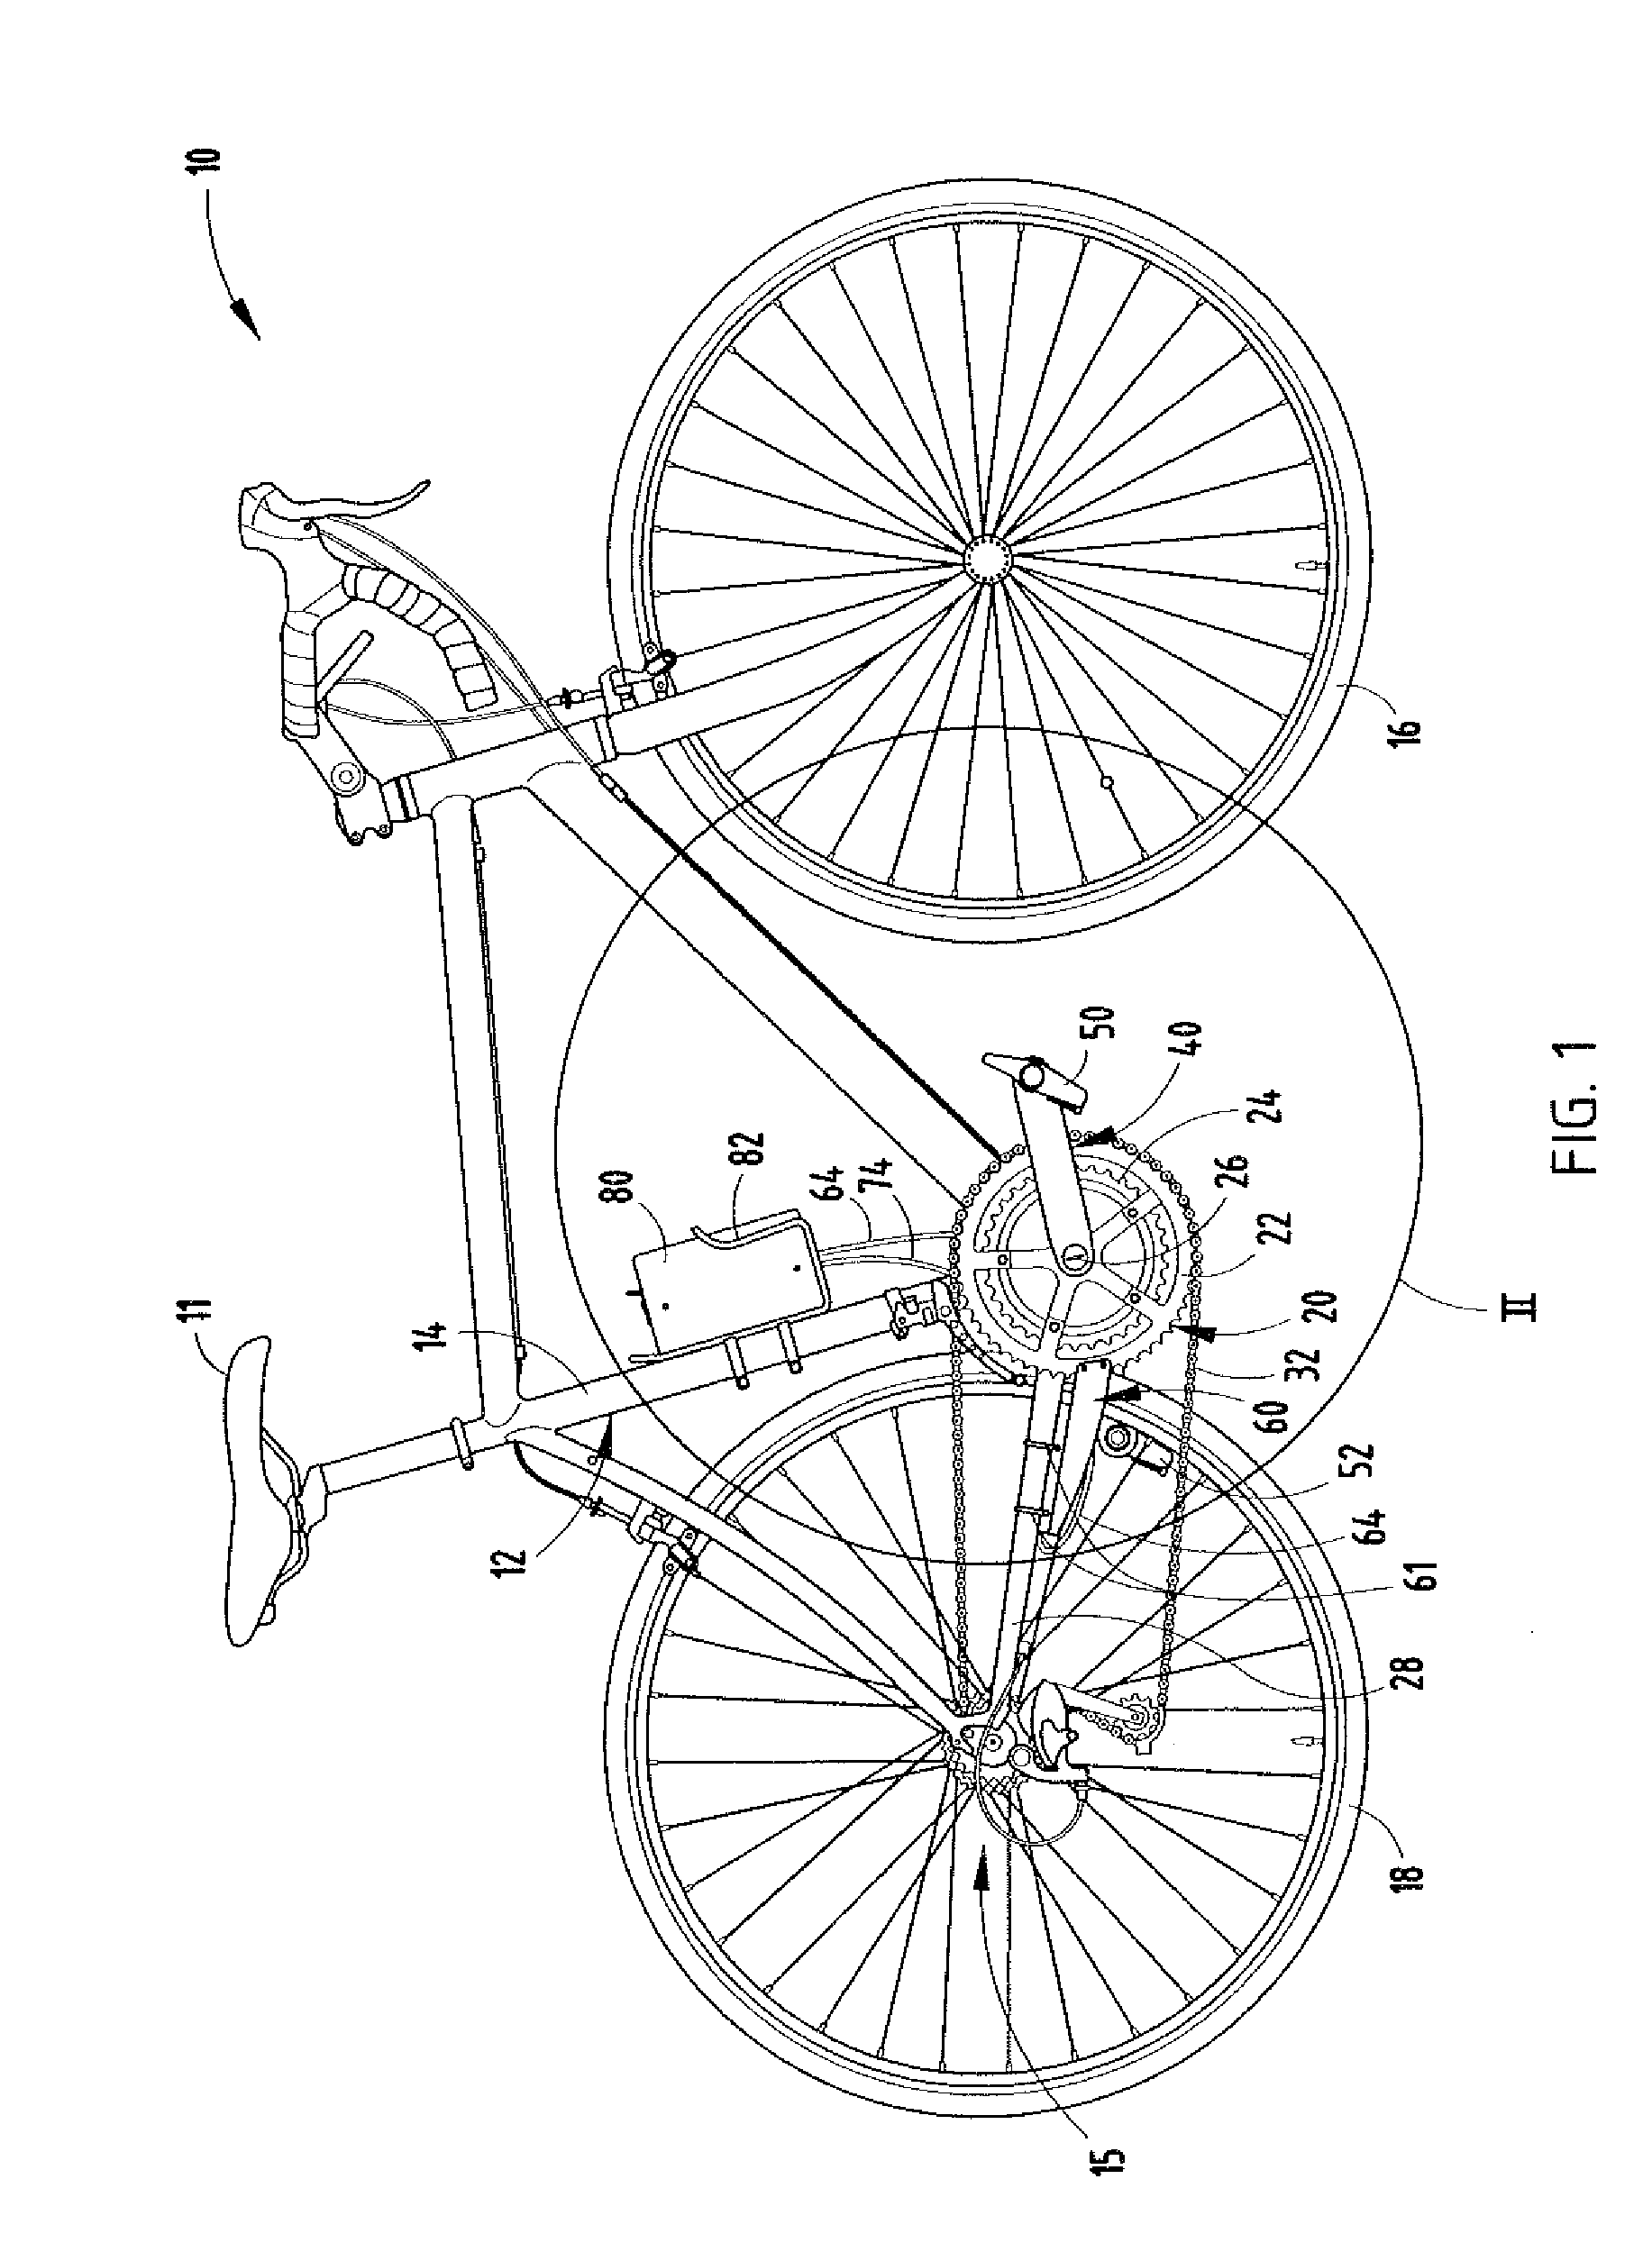 Bicycle torque measuring system